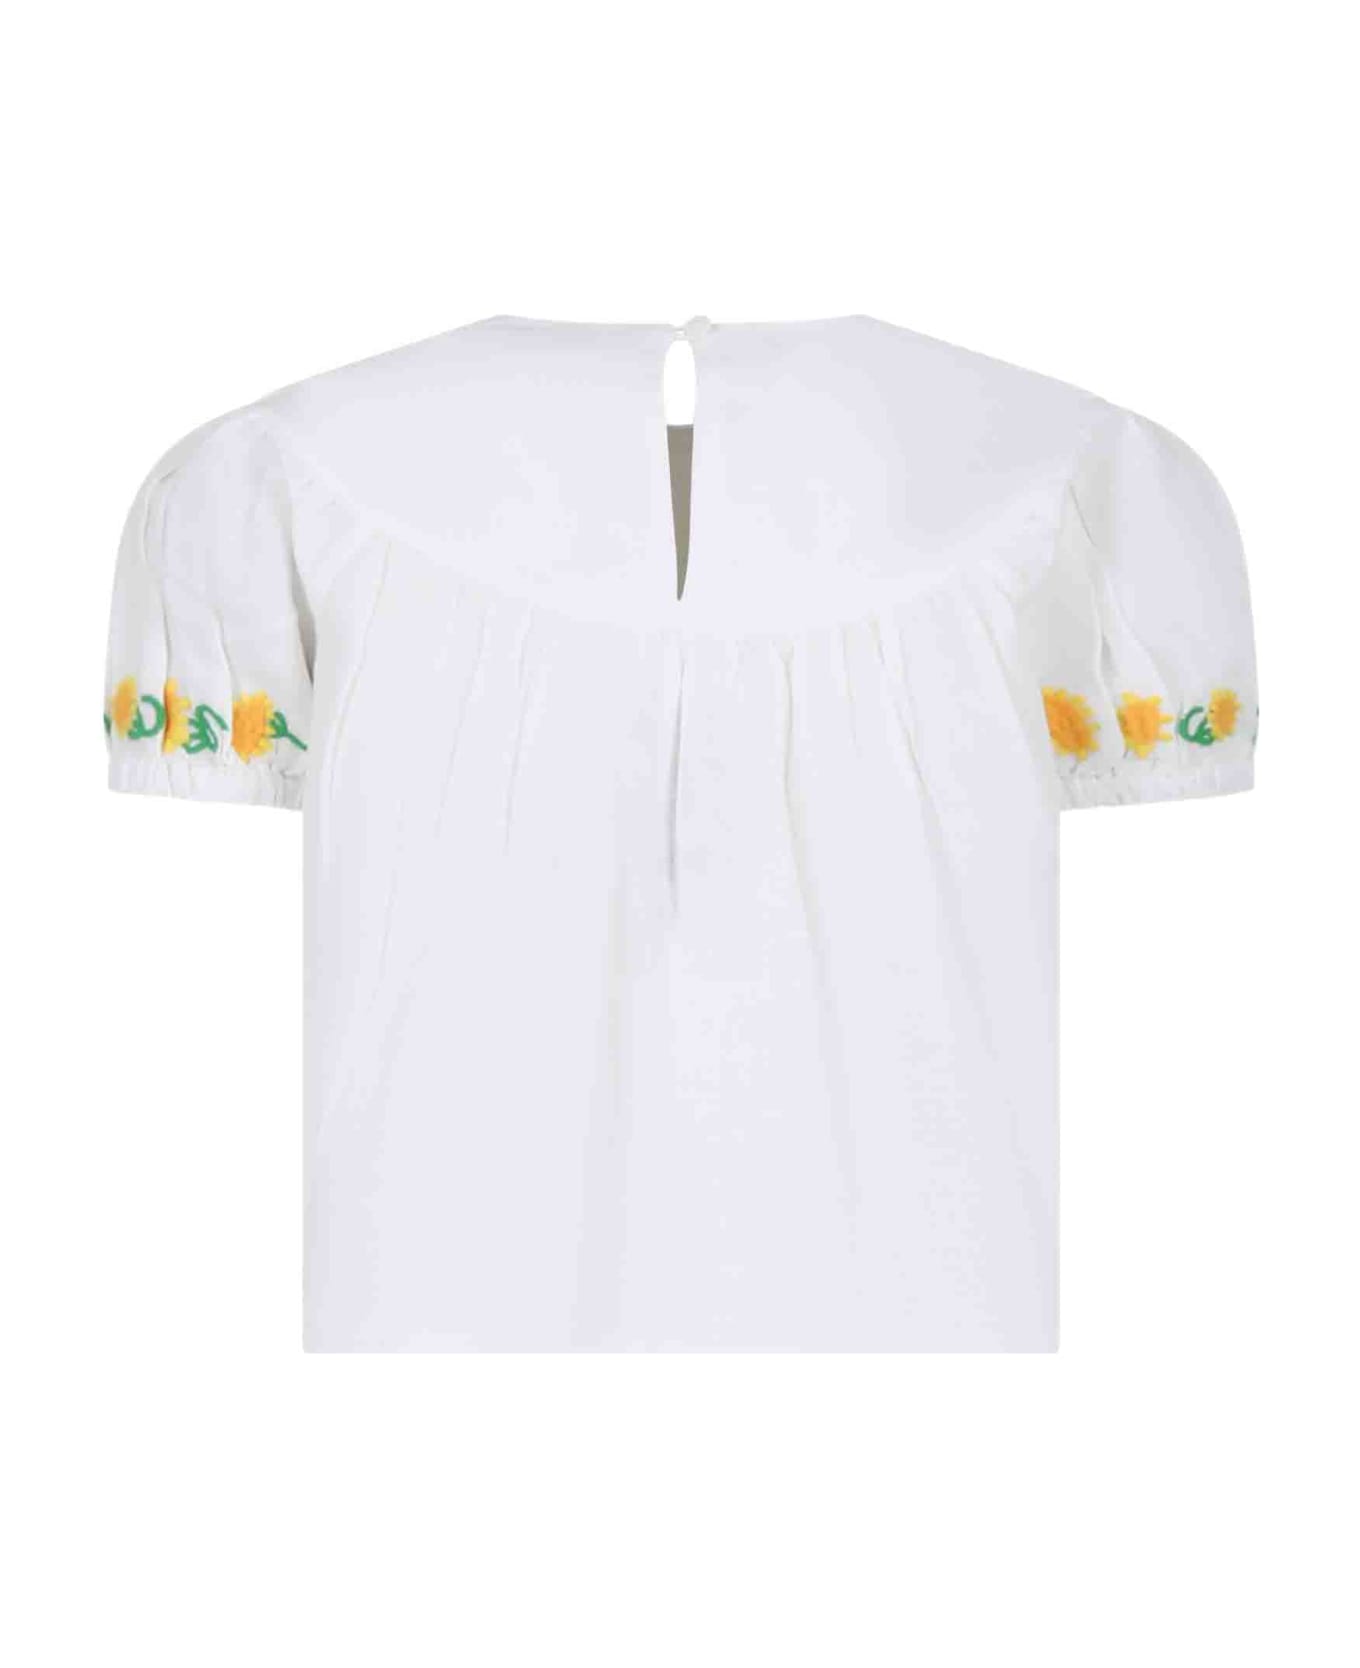 Stella McCartney Kids White Top For Girl With Embroidered Sunflowers - White